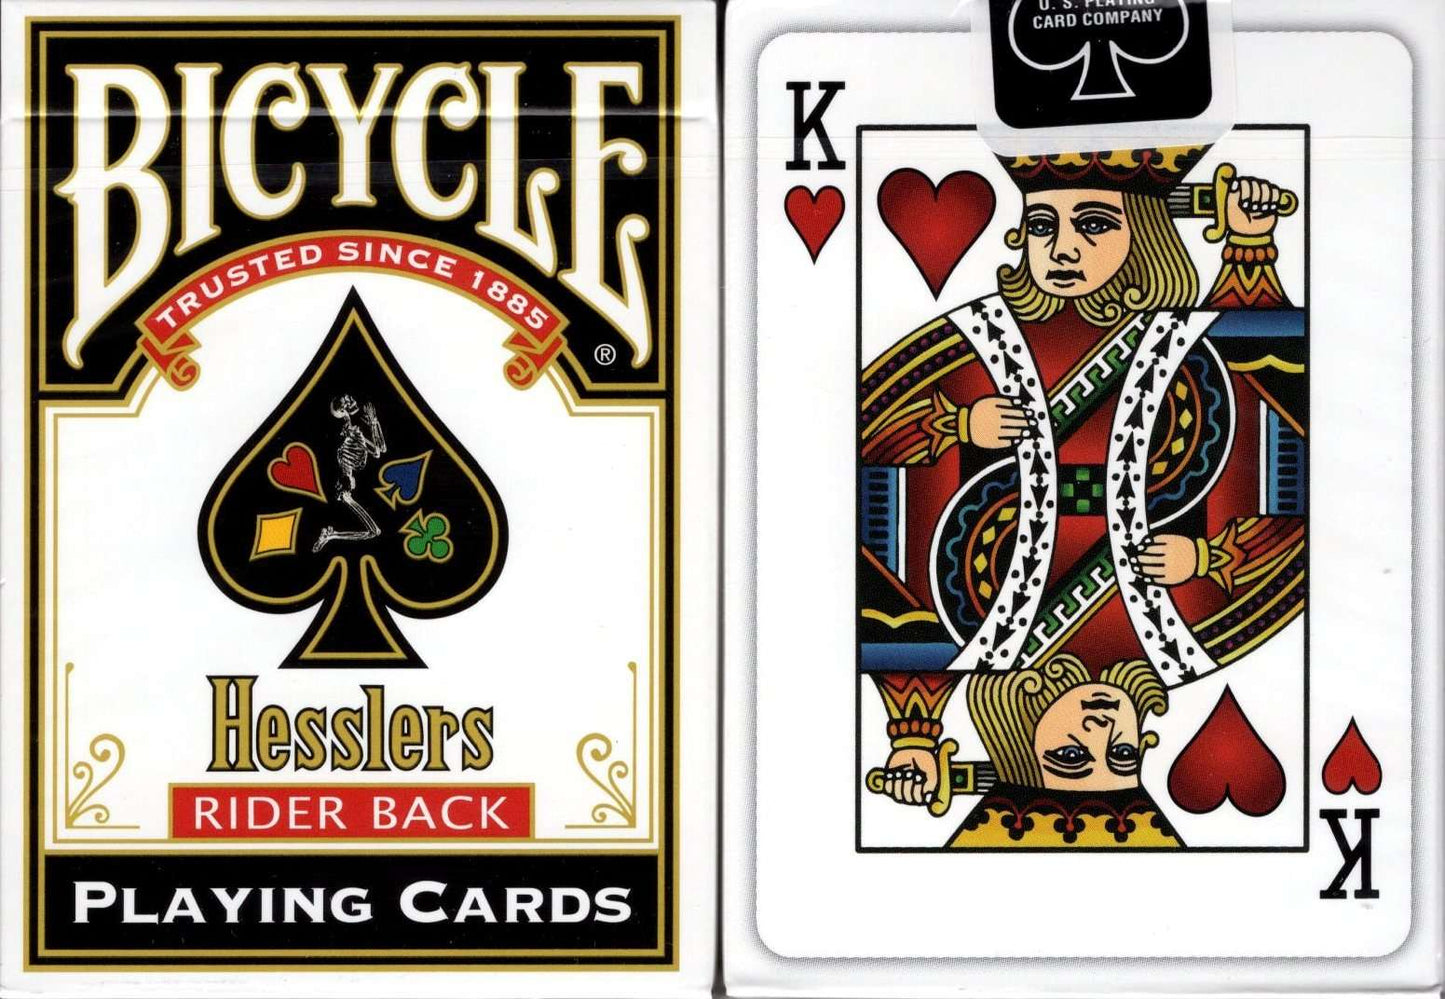 Hesslers Rider Back Bicycle Playing Cards